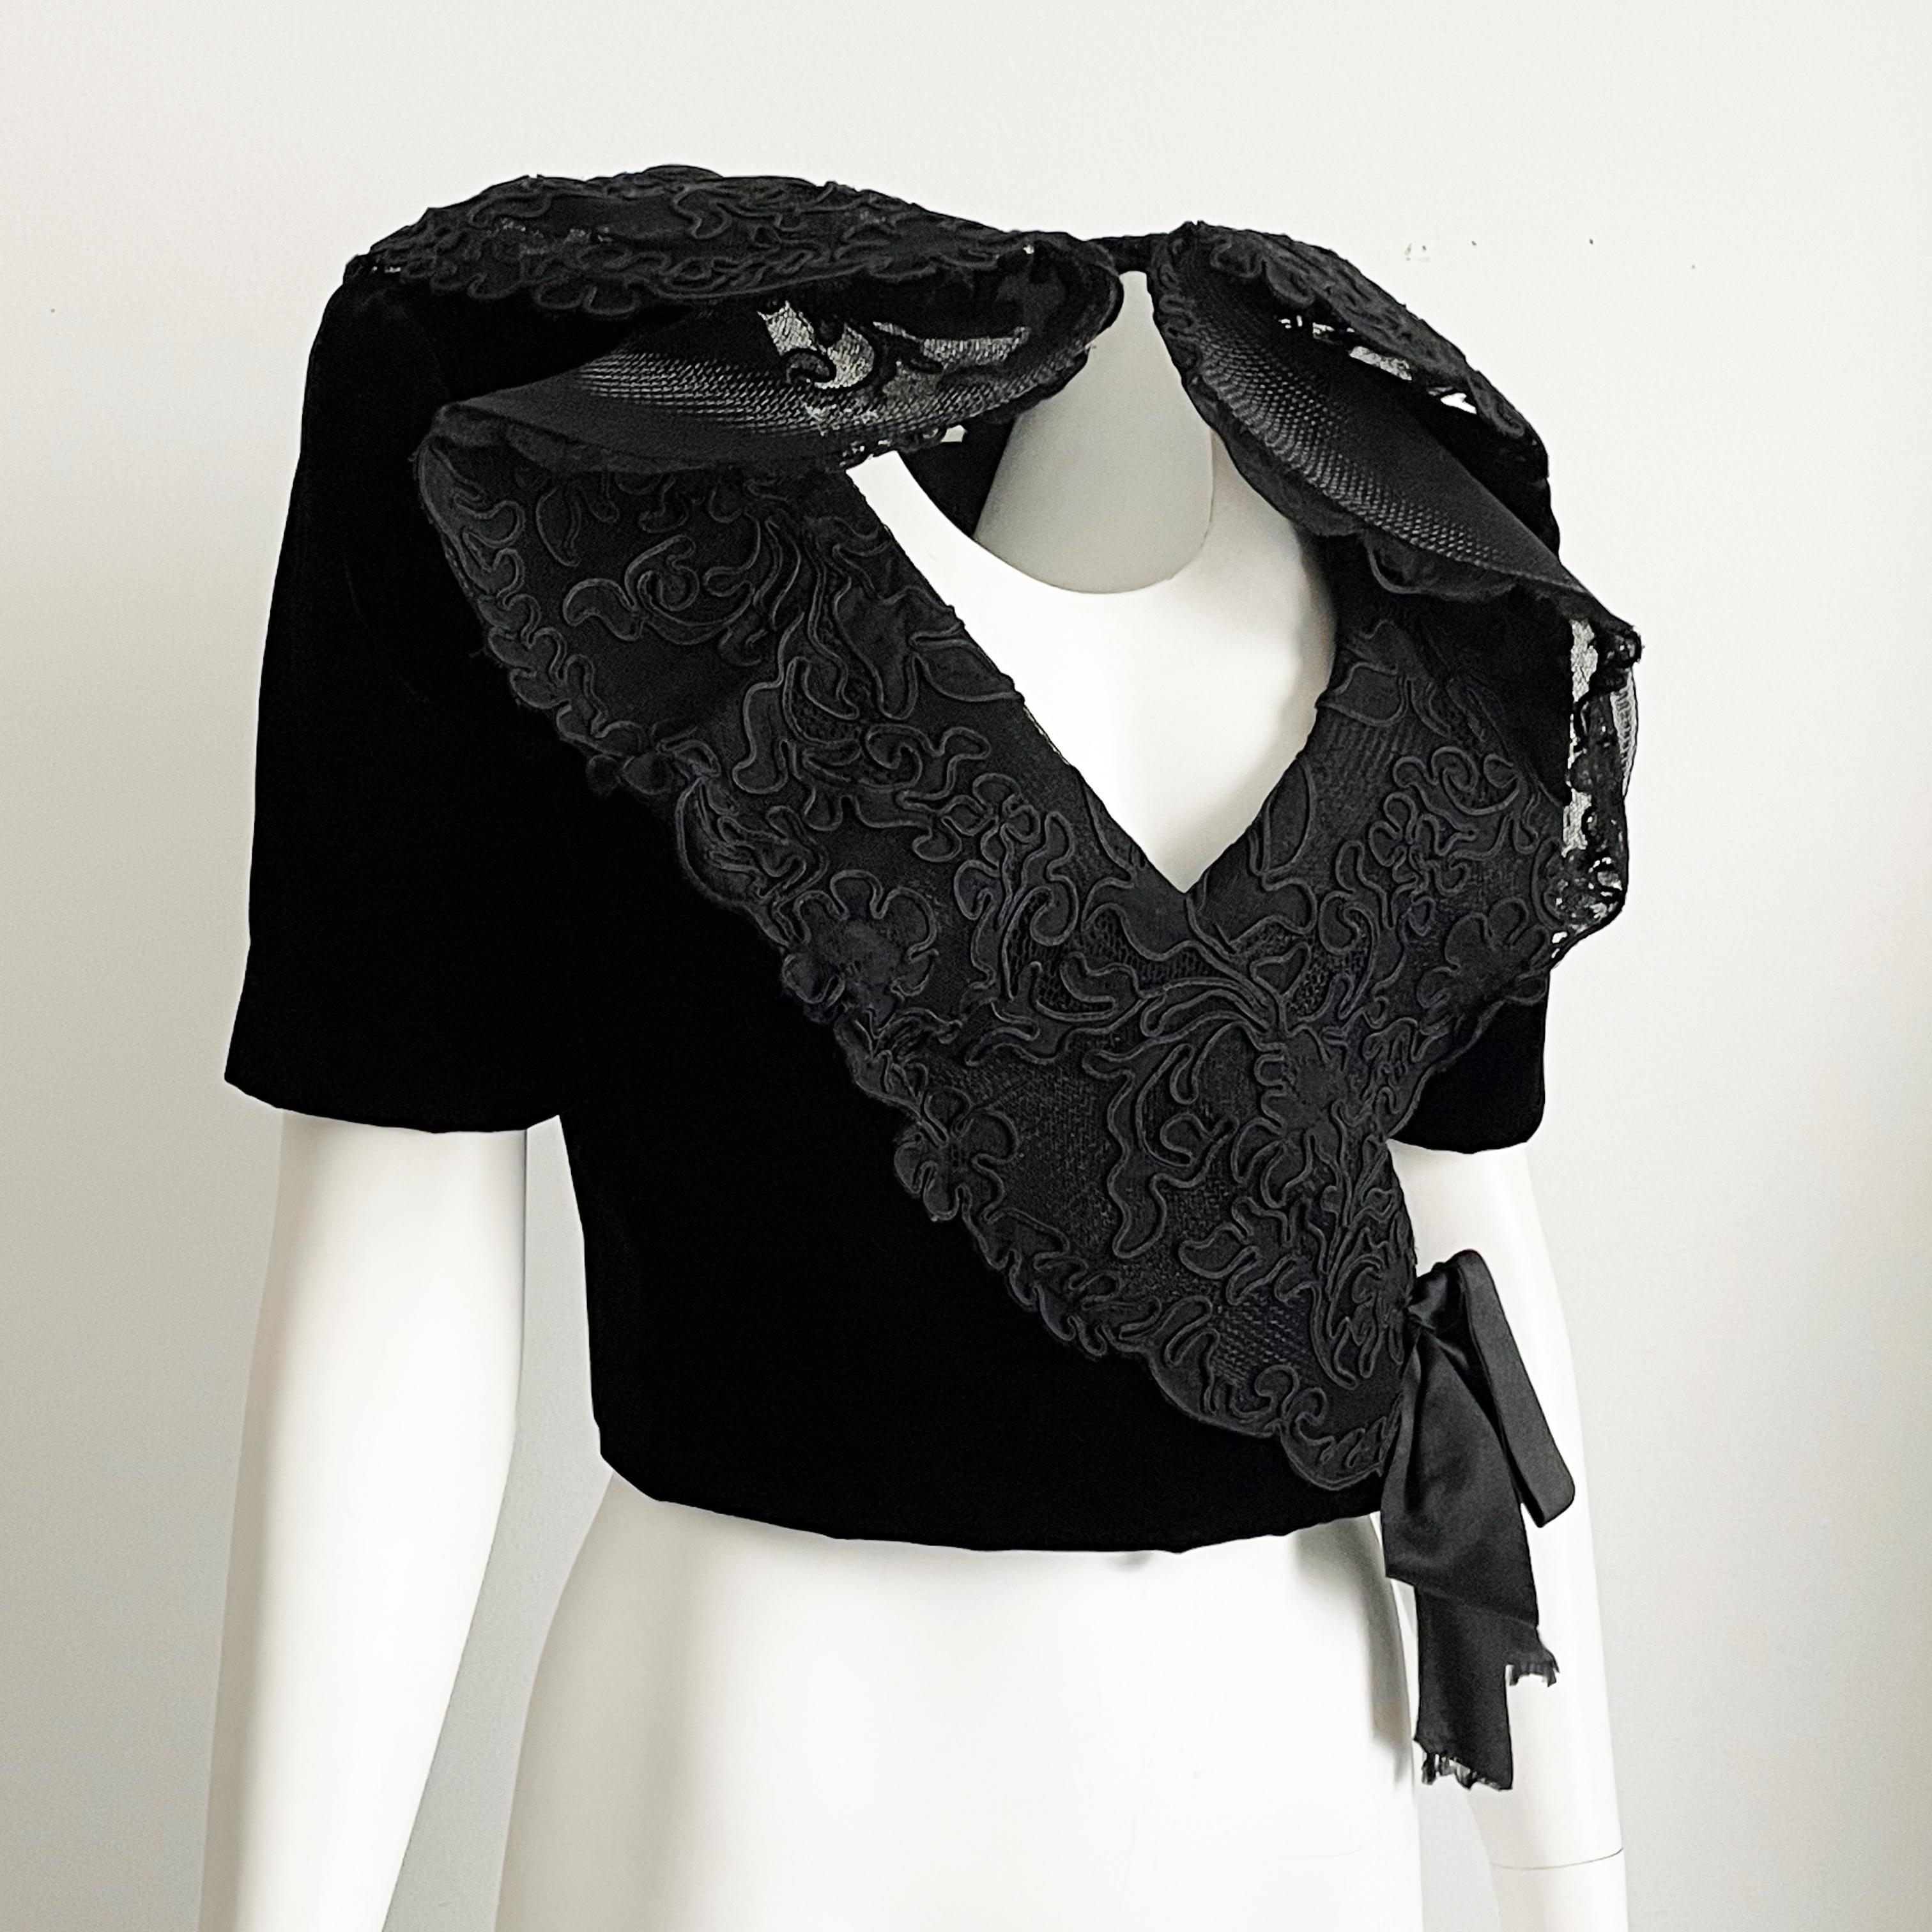 Jacqueline de Ribes Jacket Bolero Cropped Formal Couture Black Lace Velvet  In Good Condition For Sale In Port Saint Lucie, FL